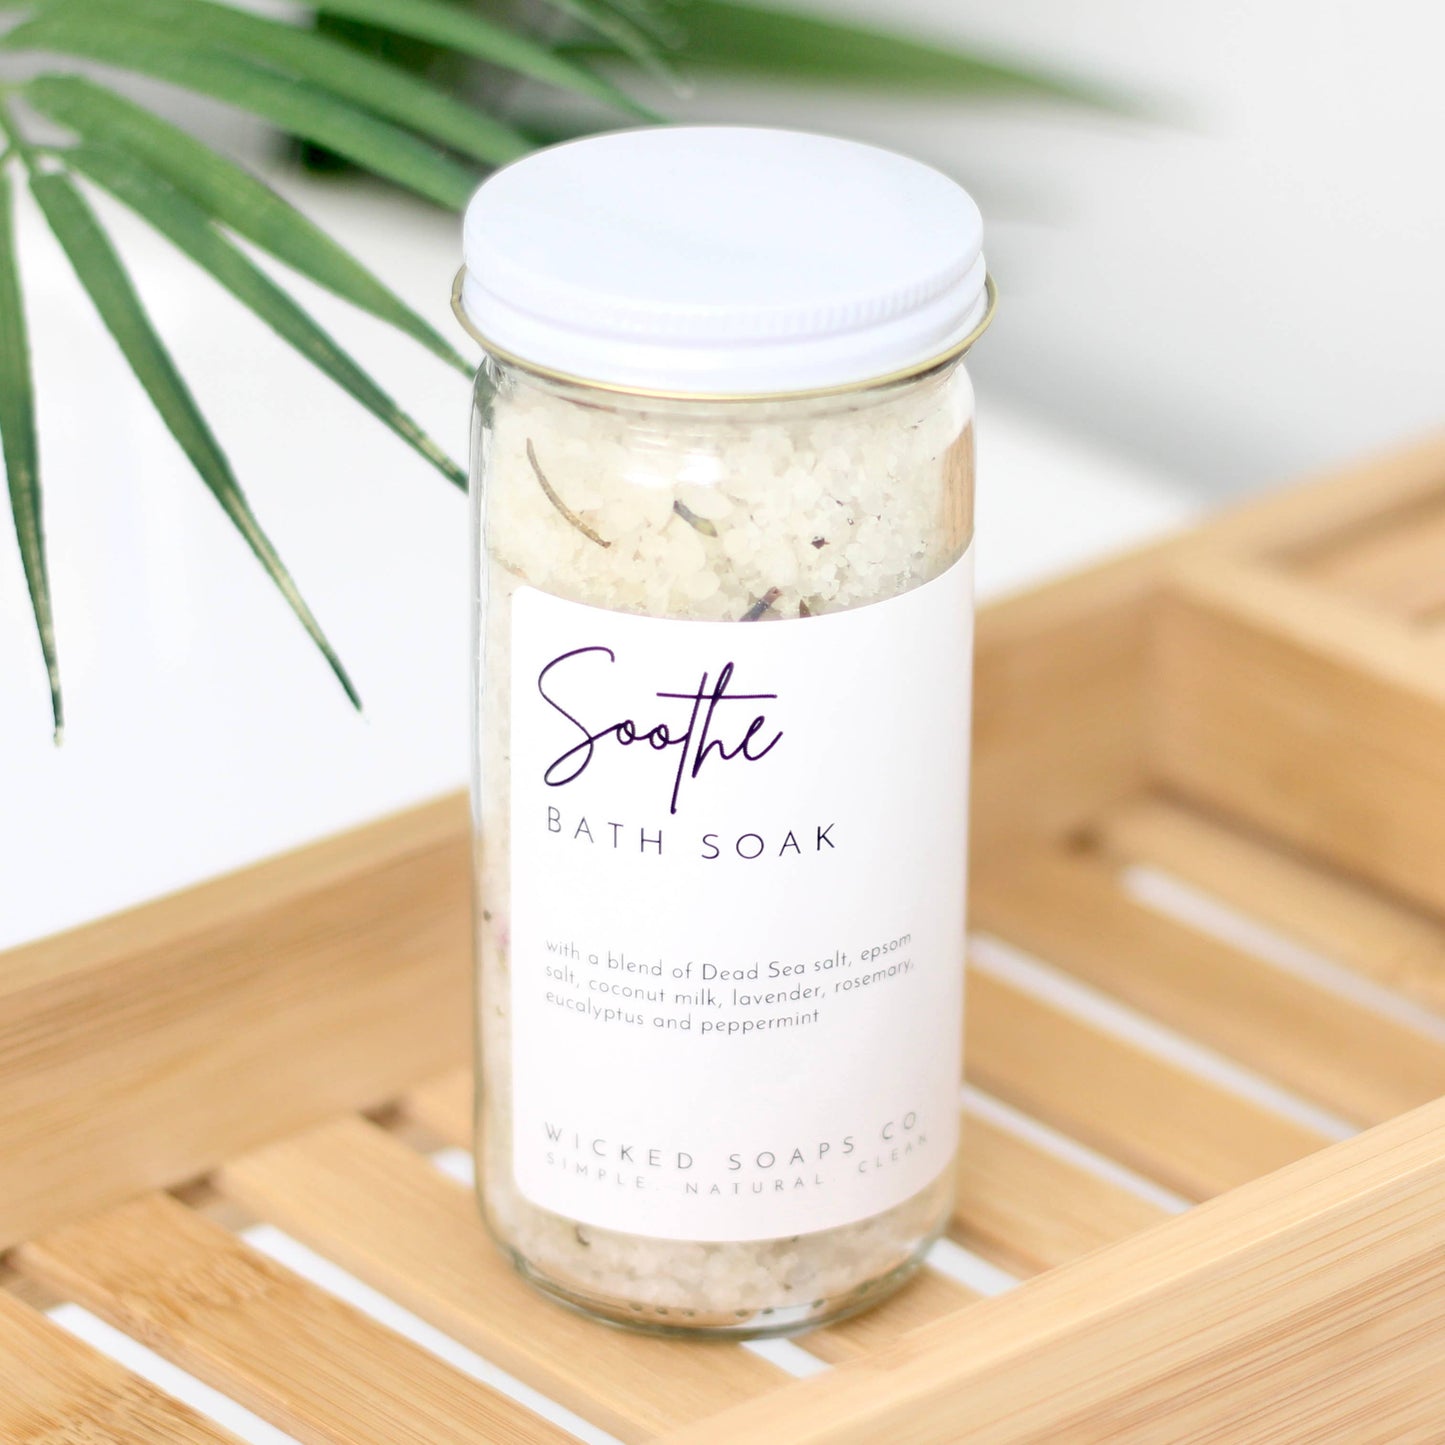 Wicked Soaps Co. - Soothe Bath Soak